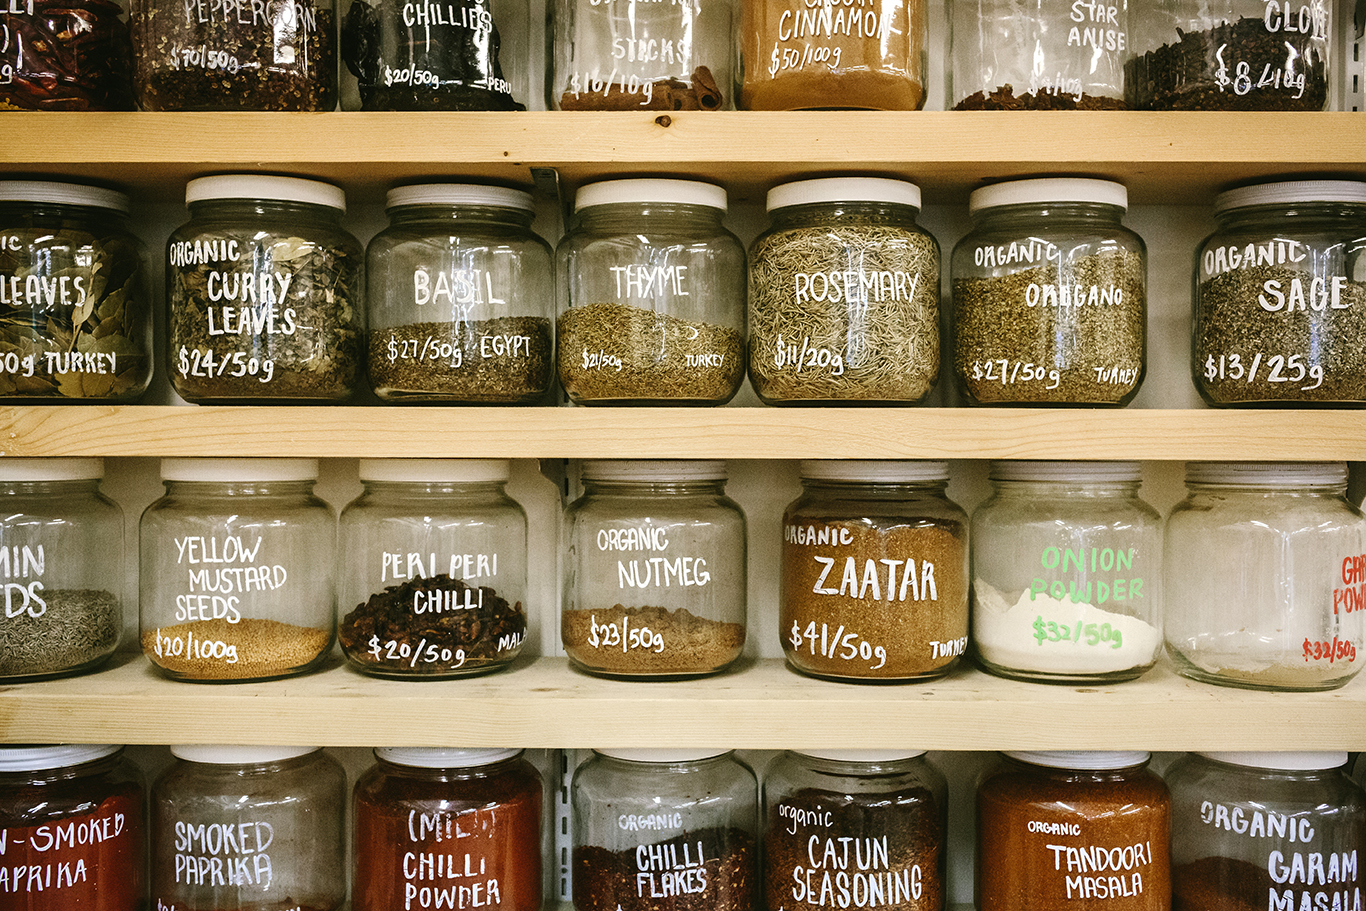 Best zero-waste stores you should visit in Hong Kong